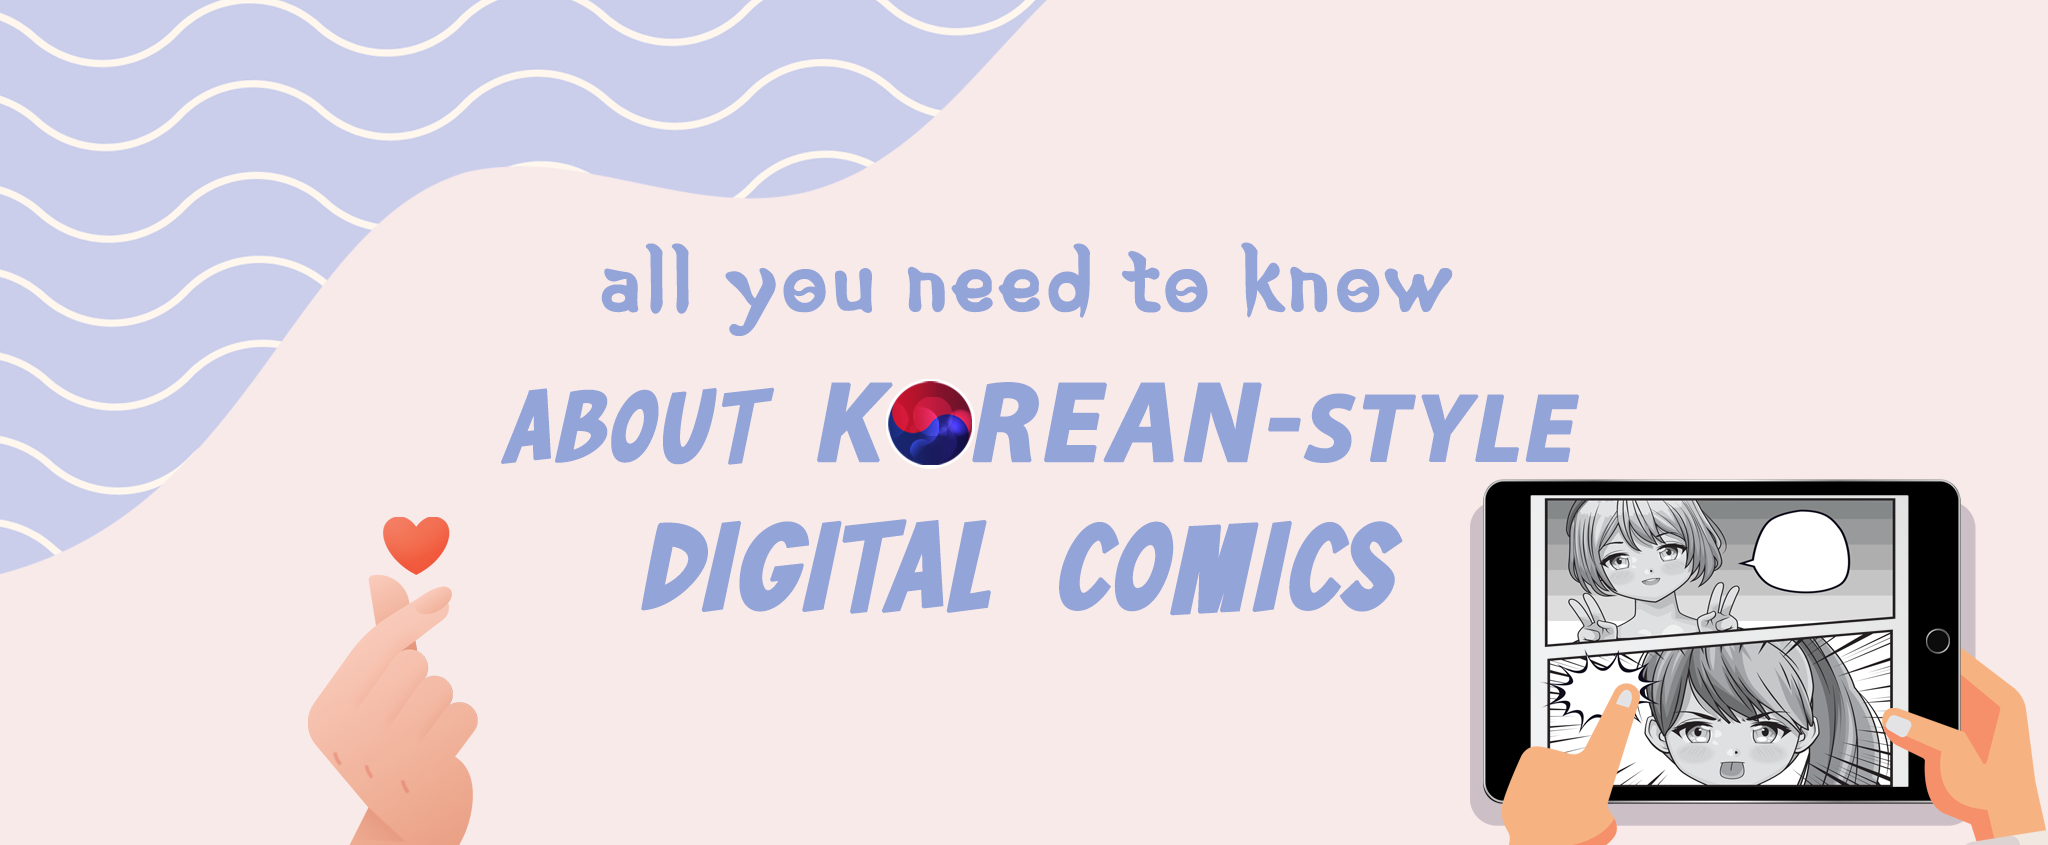 All You Need to Know about Korean-style Digital Comics